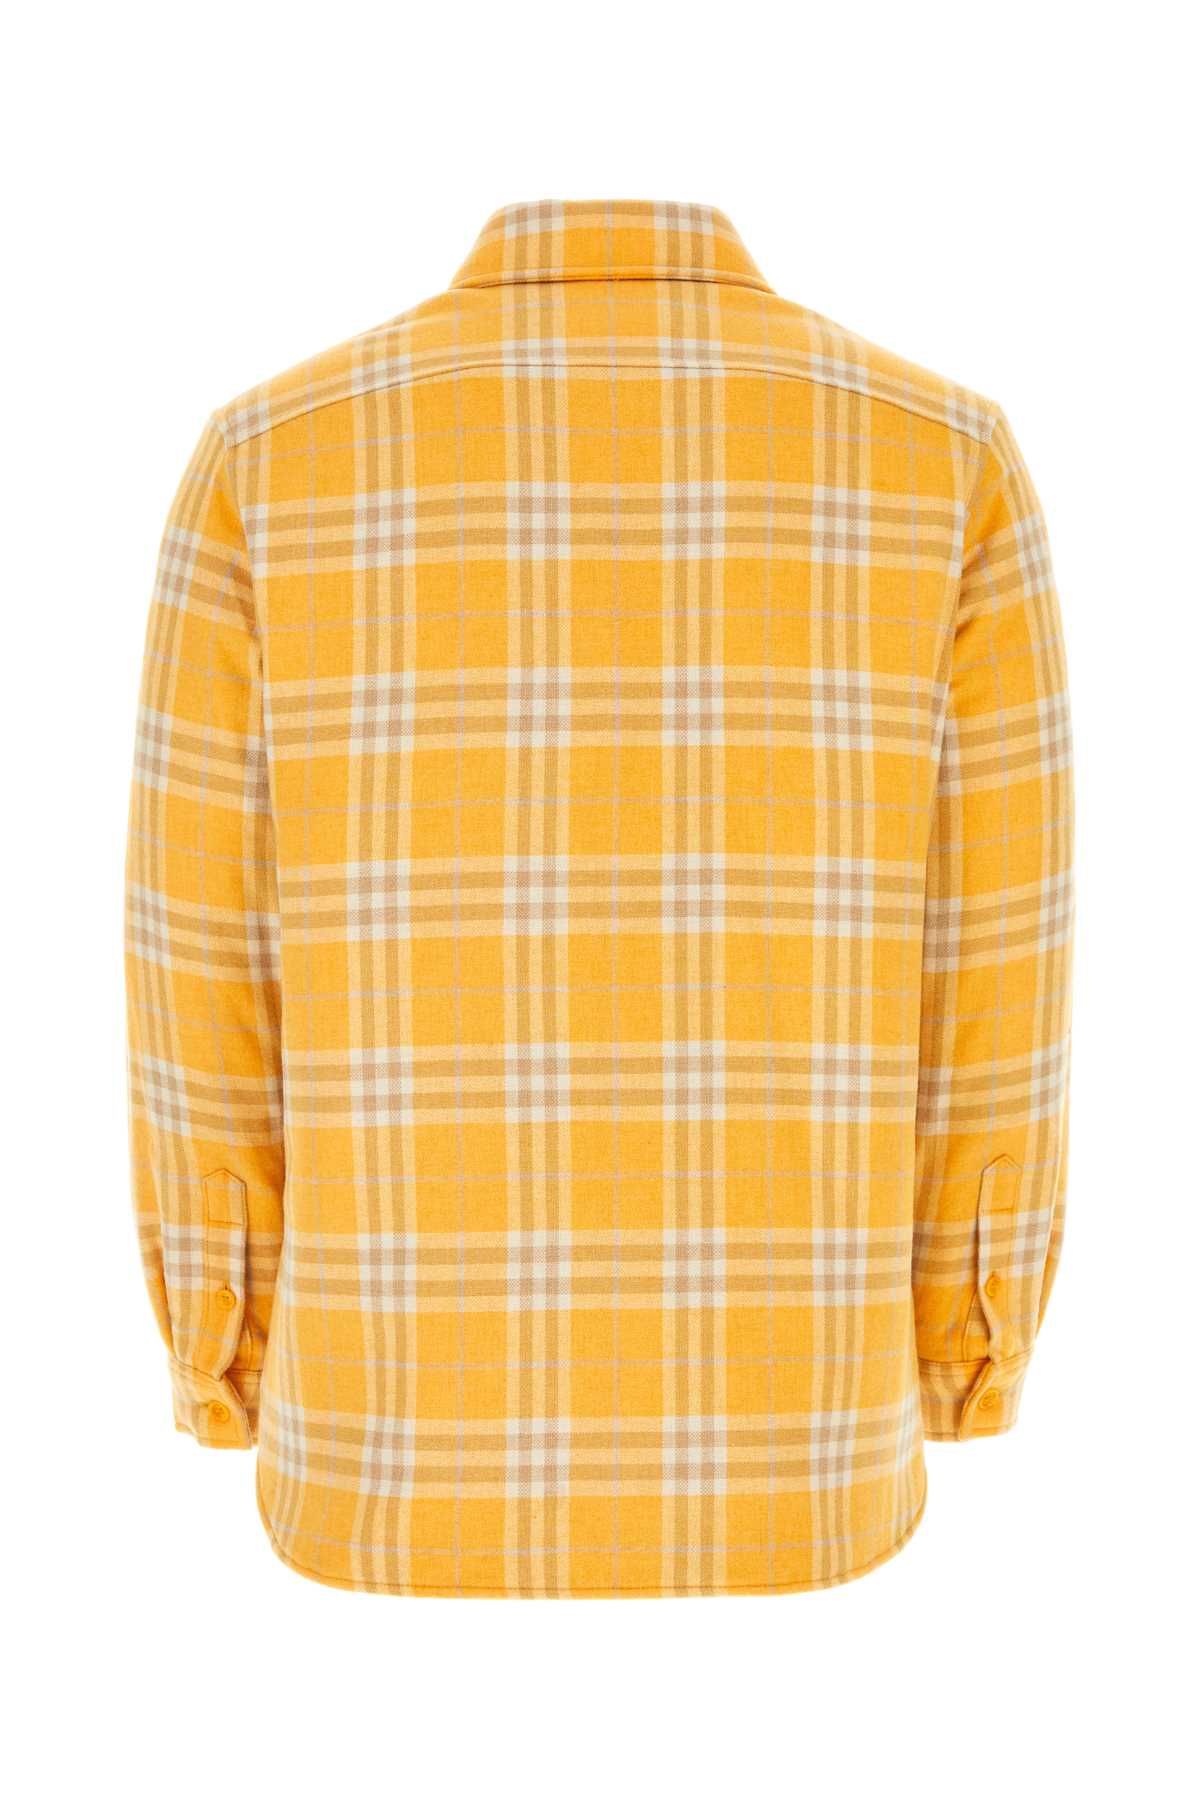 Burberry Embroidered Flannel Oversize Shirt In Marigoldipcheck